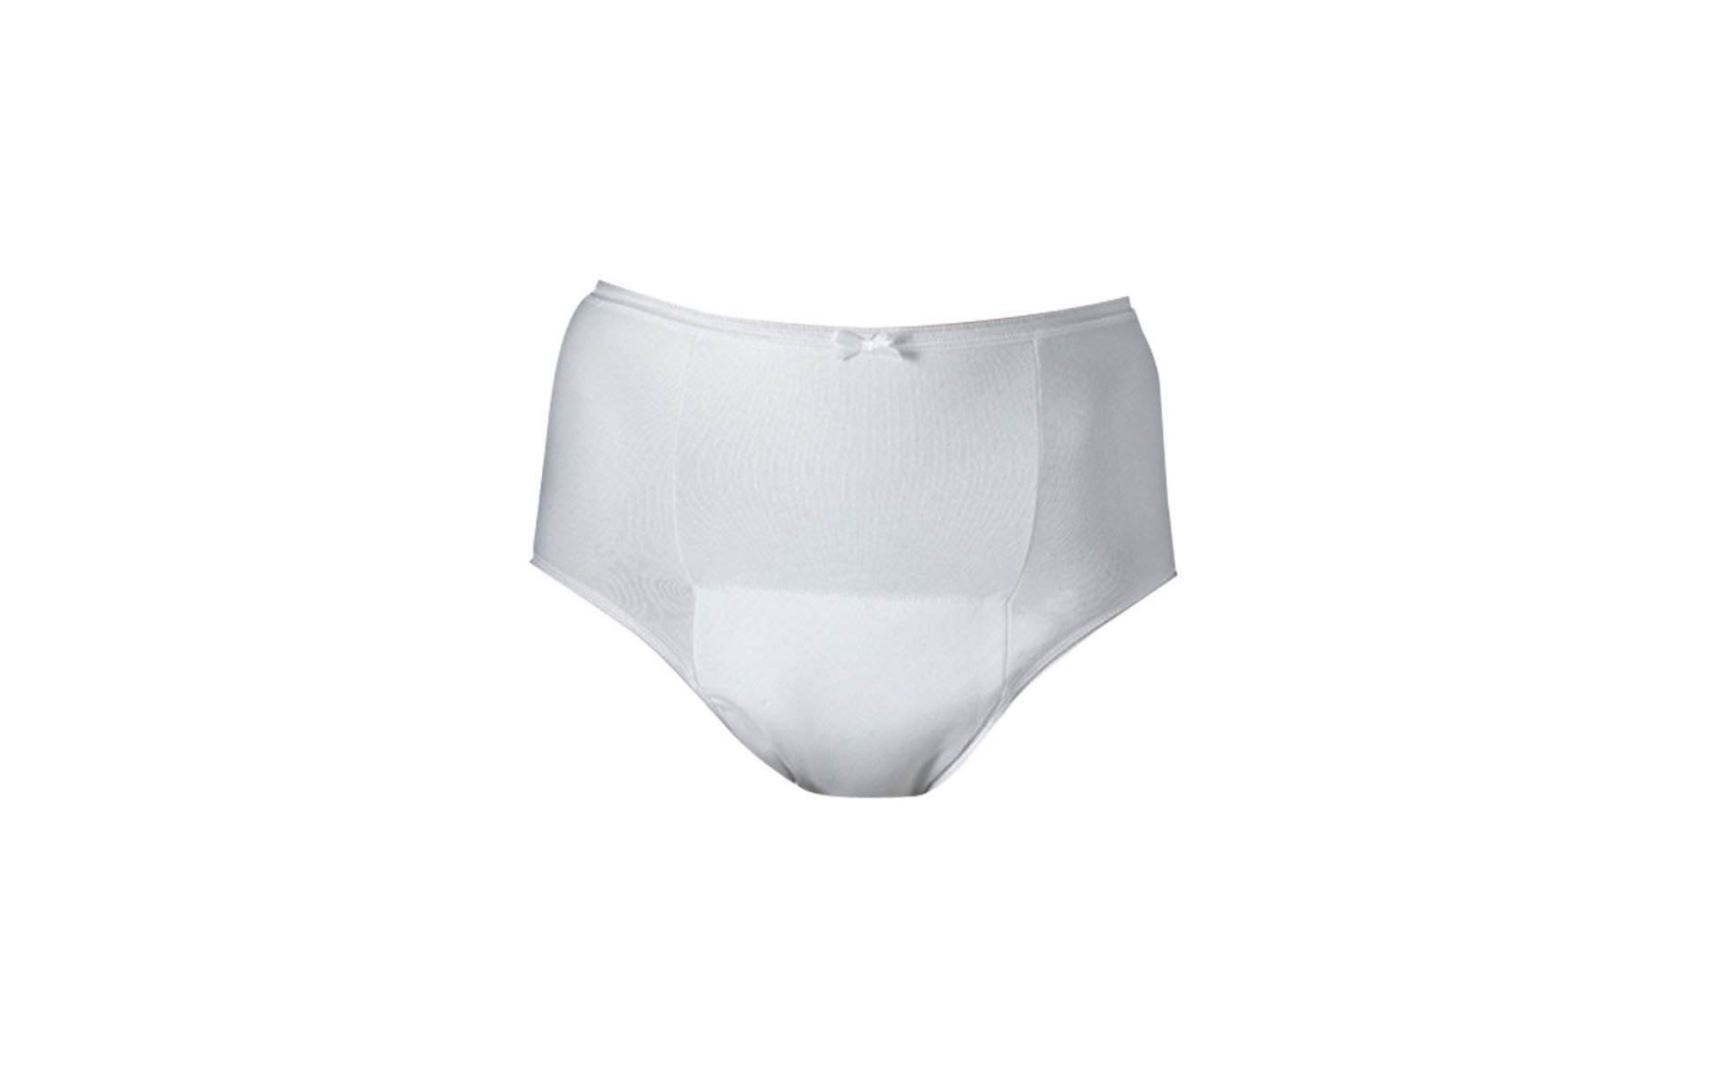 Ladies Washable Incontinence Pants, Incontinence Care